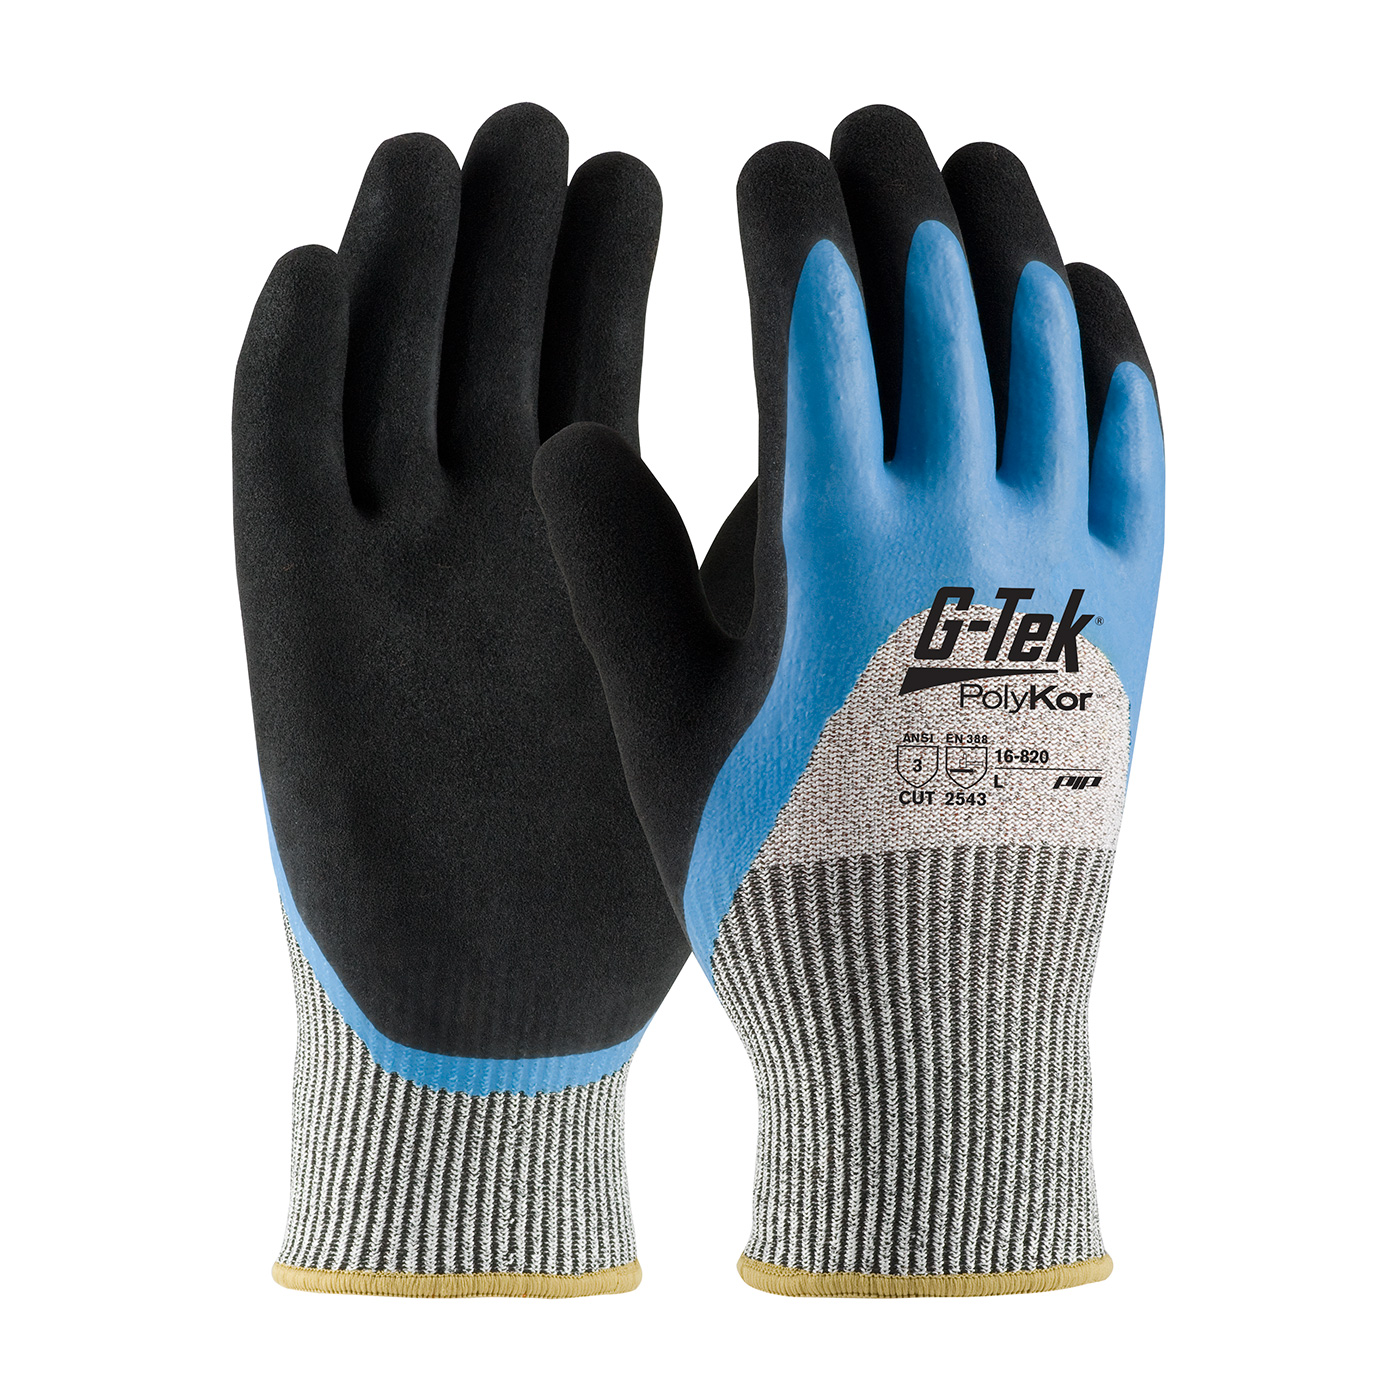 PIP 16-820/L G-Tek PolyKor Seamless Knit PolyKor Blended Glove with Acrylic Lining and Double-Dipped Latex Coated MicroSurface Grip on Palm, Fingers & Knuckles - Large PID-16 820 L